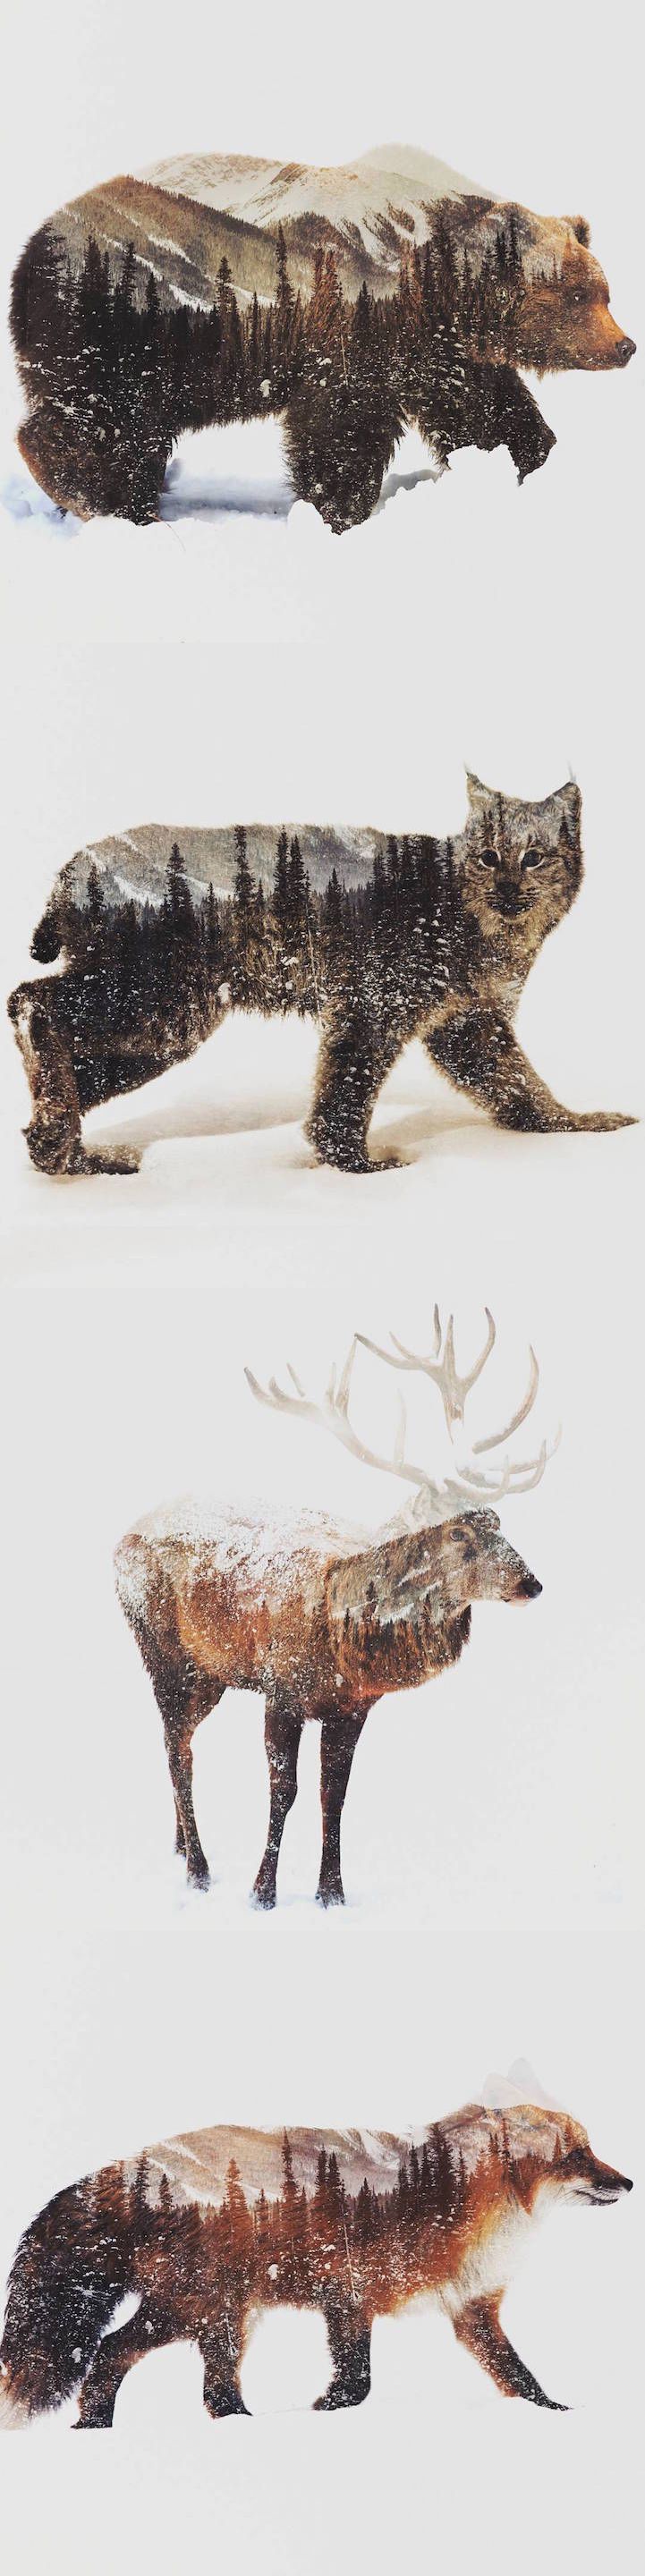 Norwegian artist Andreas Lie uses double exposure photos to capture the essence of animals in arctic l